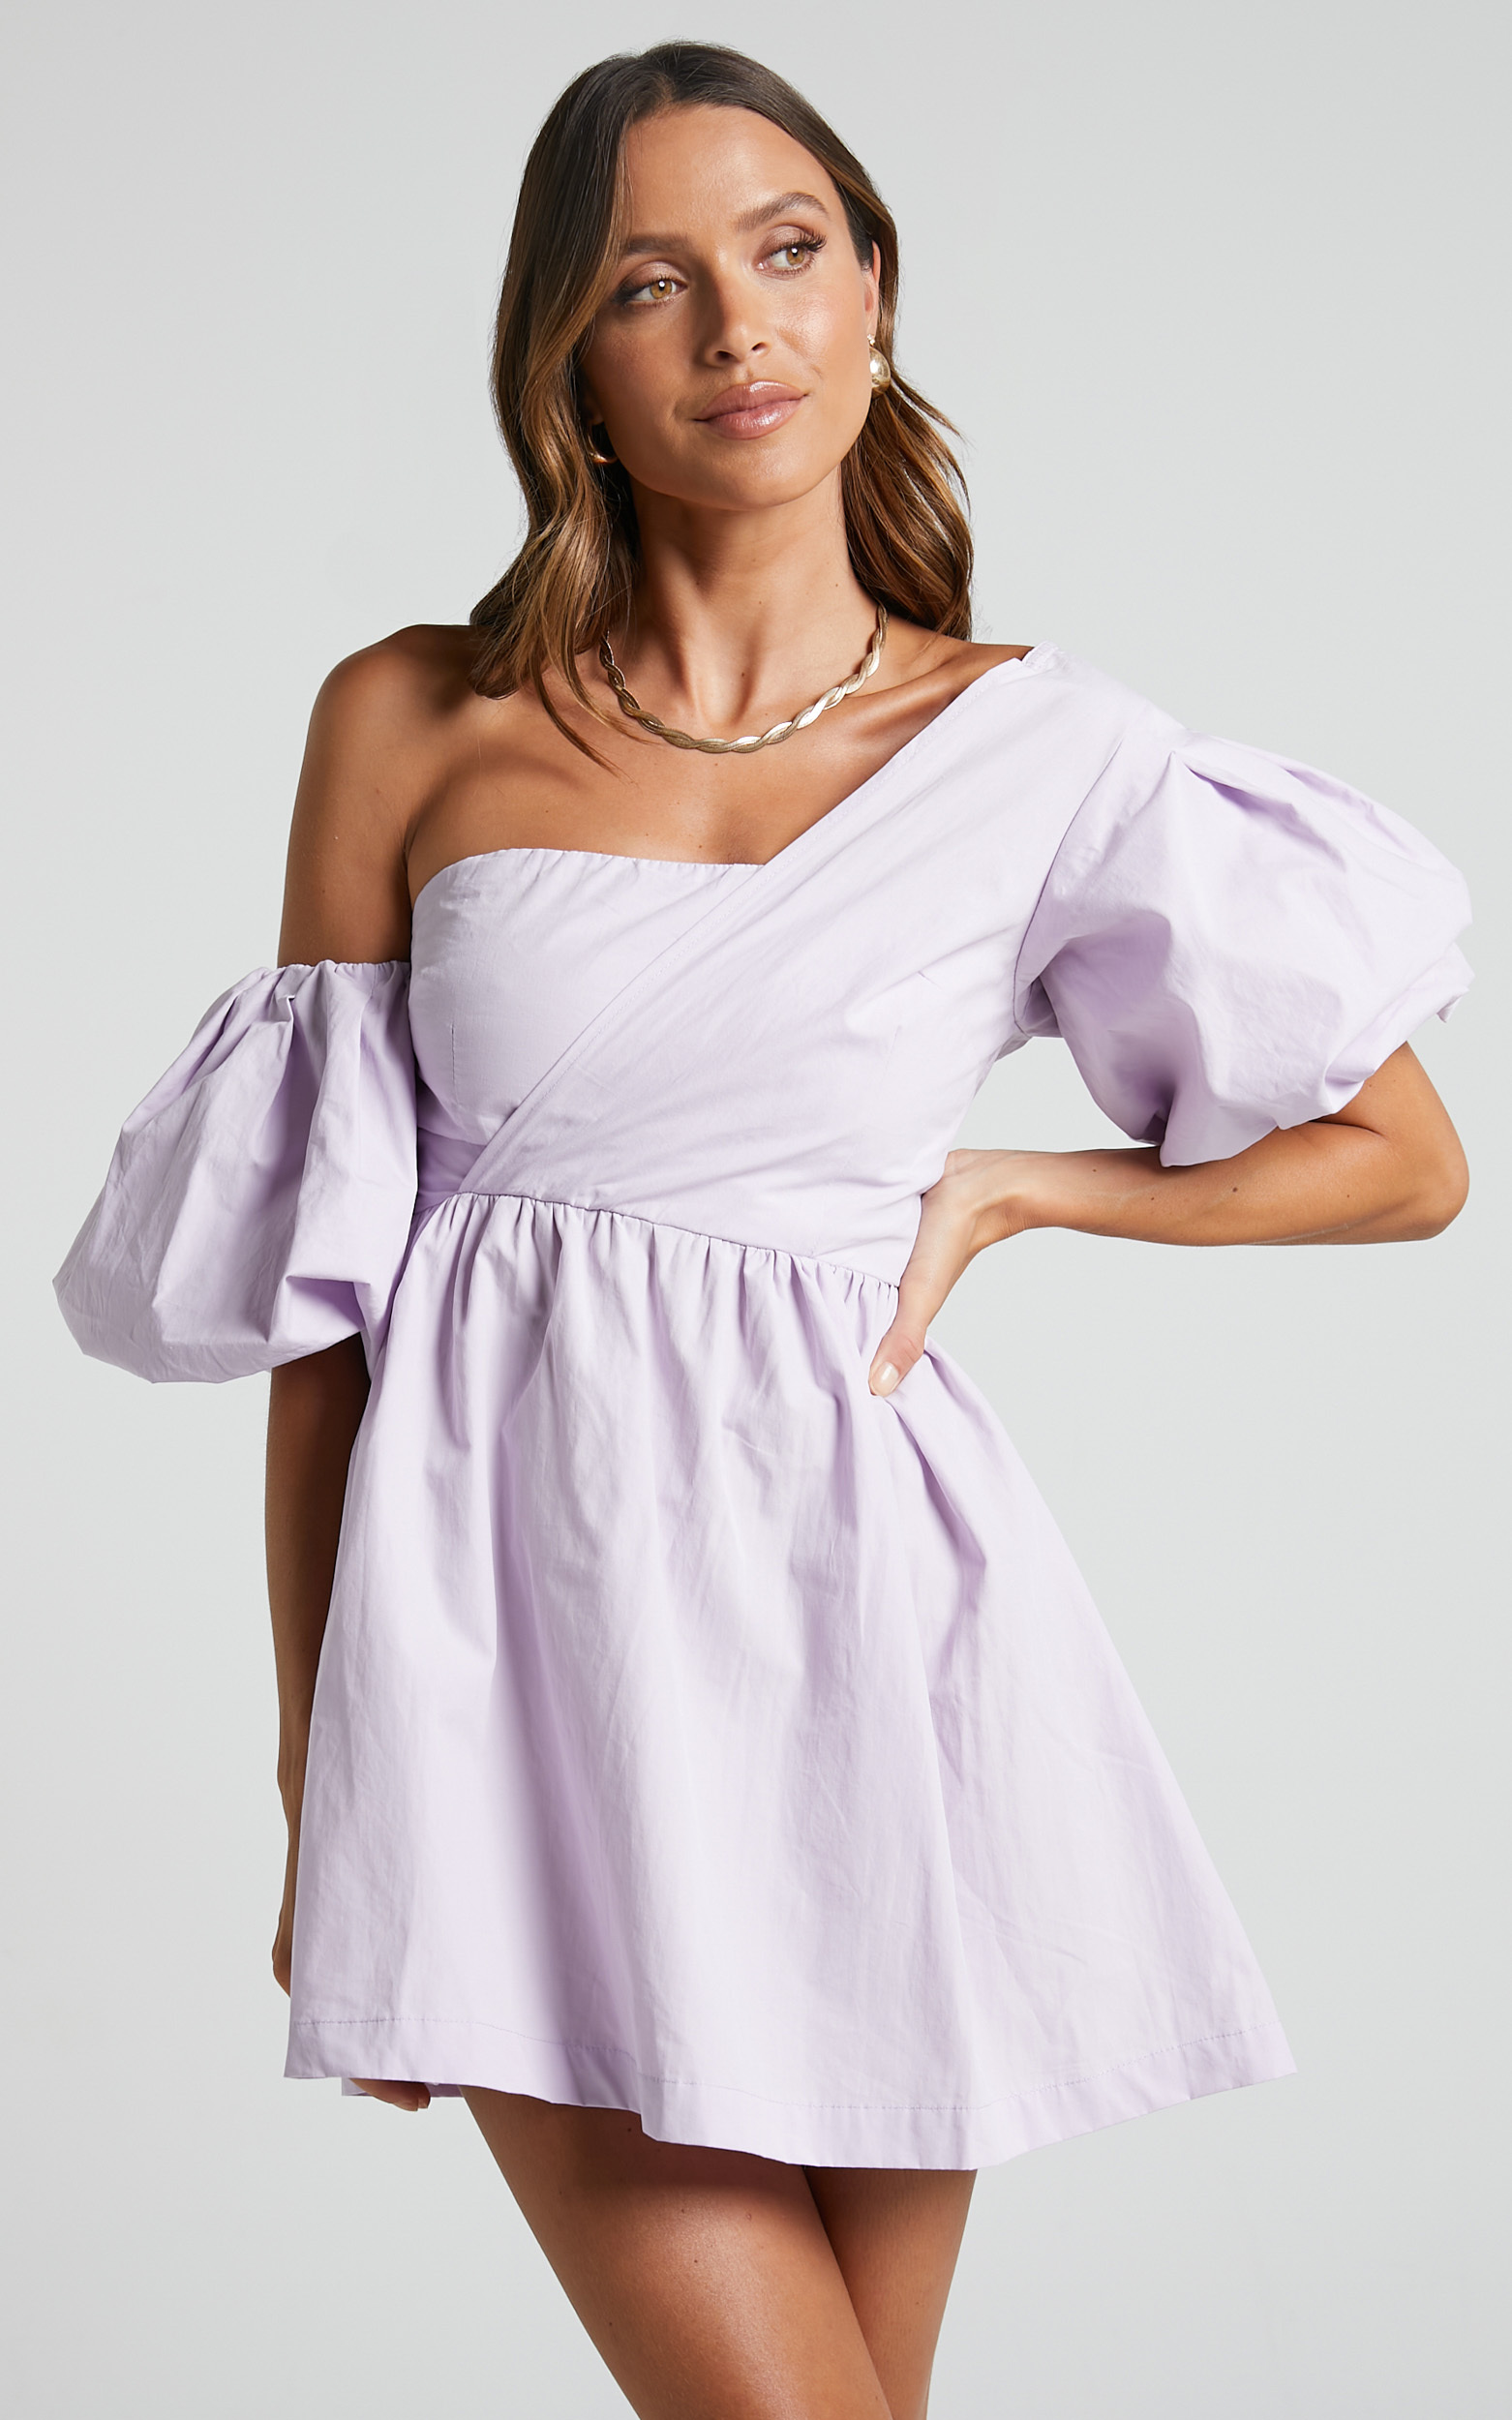 Sula Mini Dress - Asymmetric Off One Shoulder Puff Sleeve Dress in Lilac - 04, PRP1, hi-res image number null